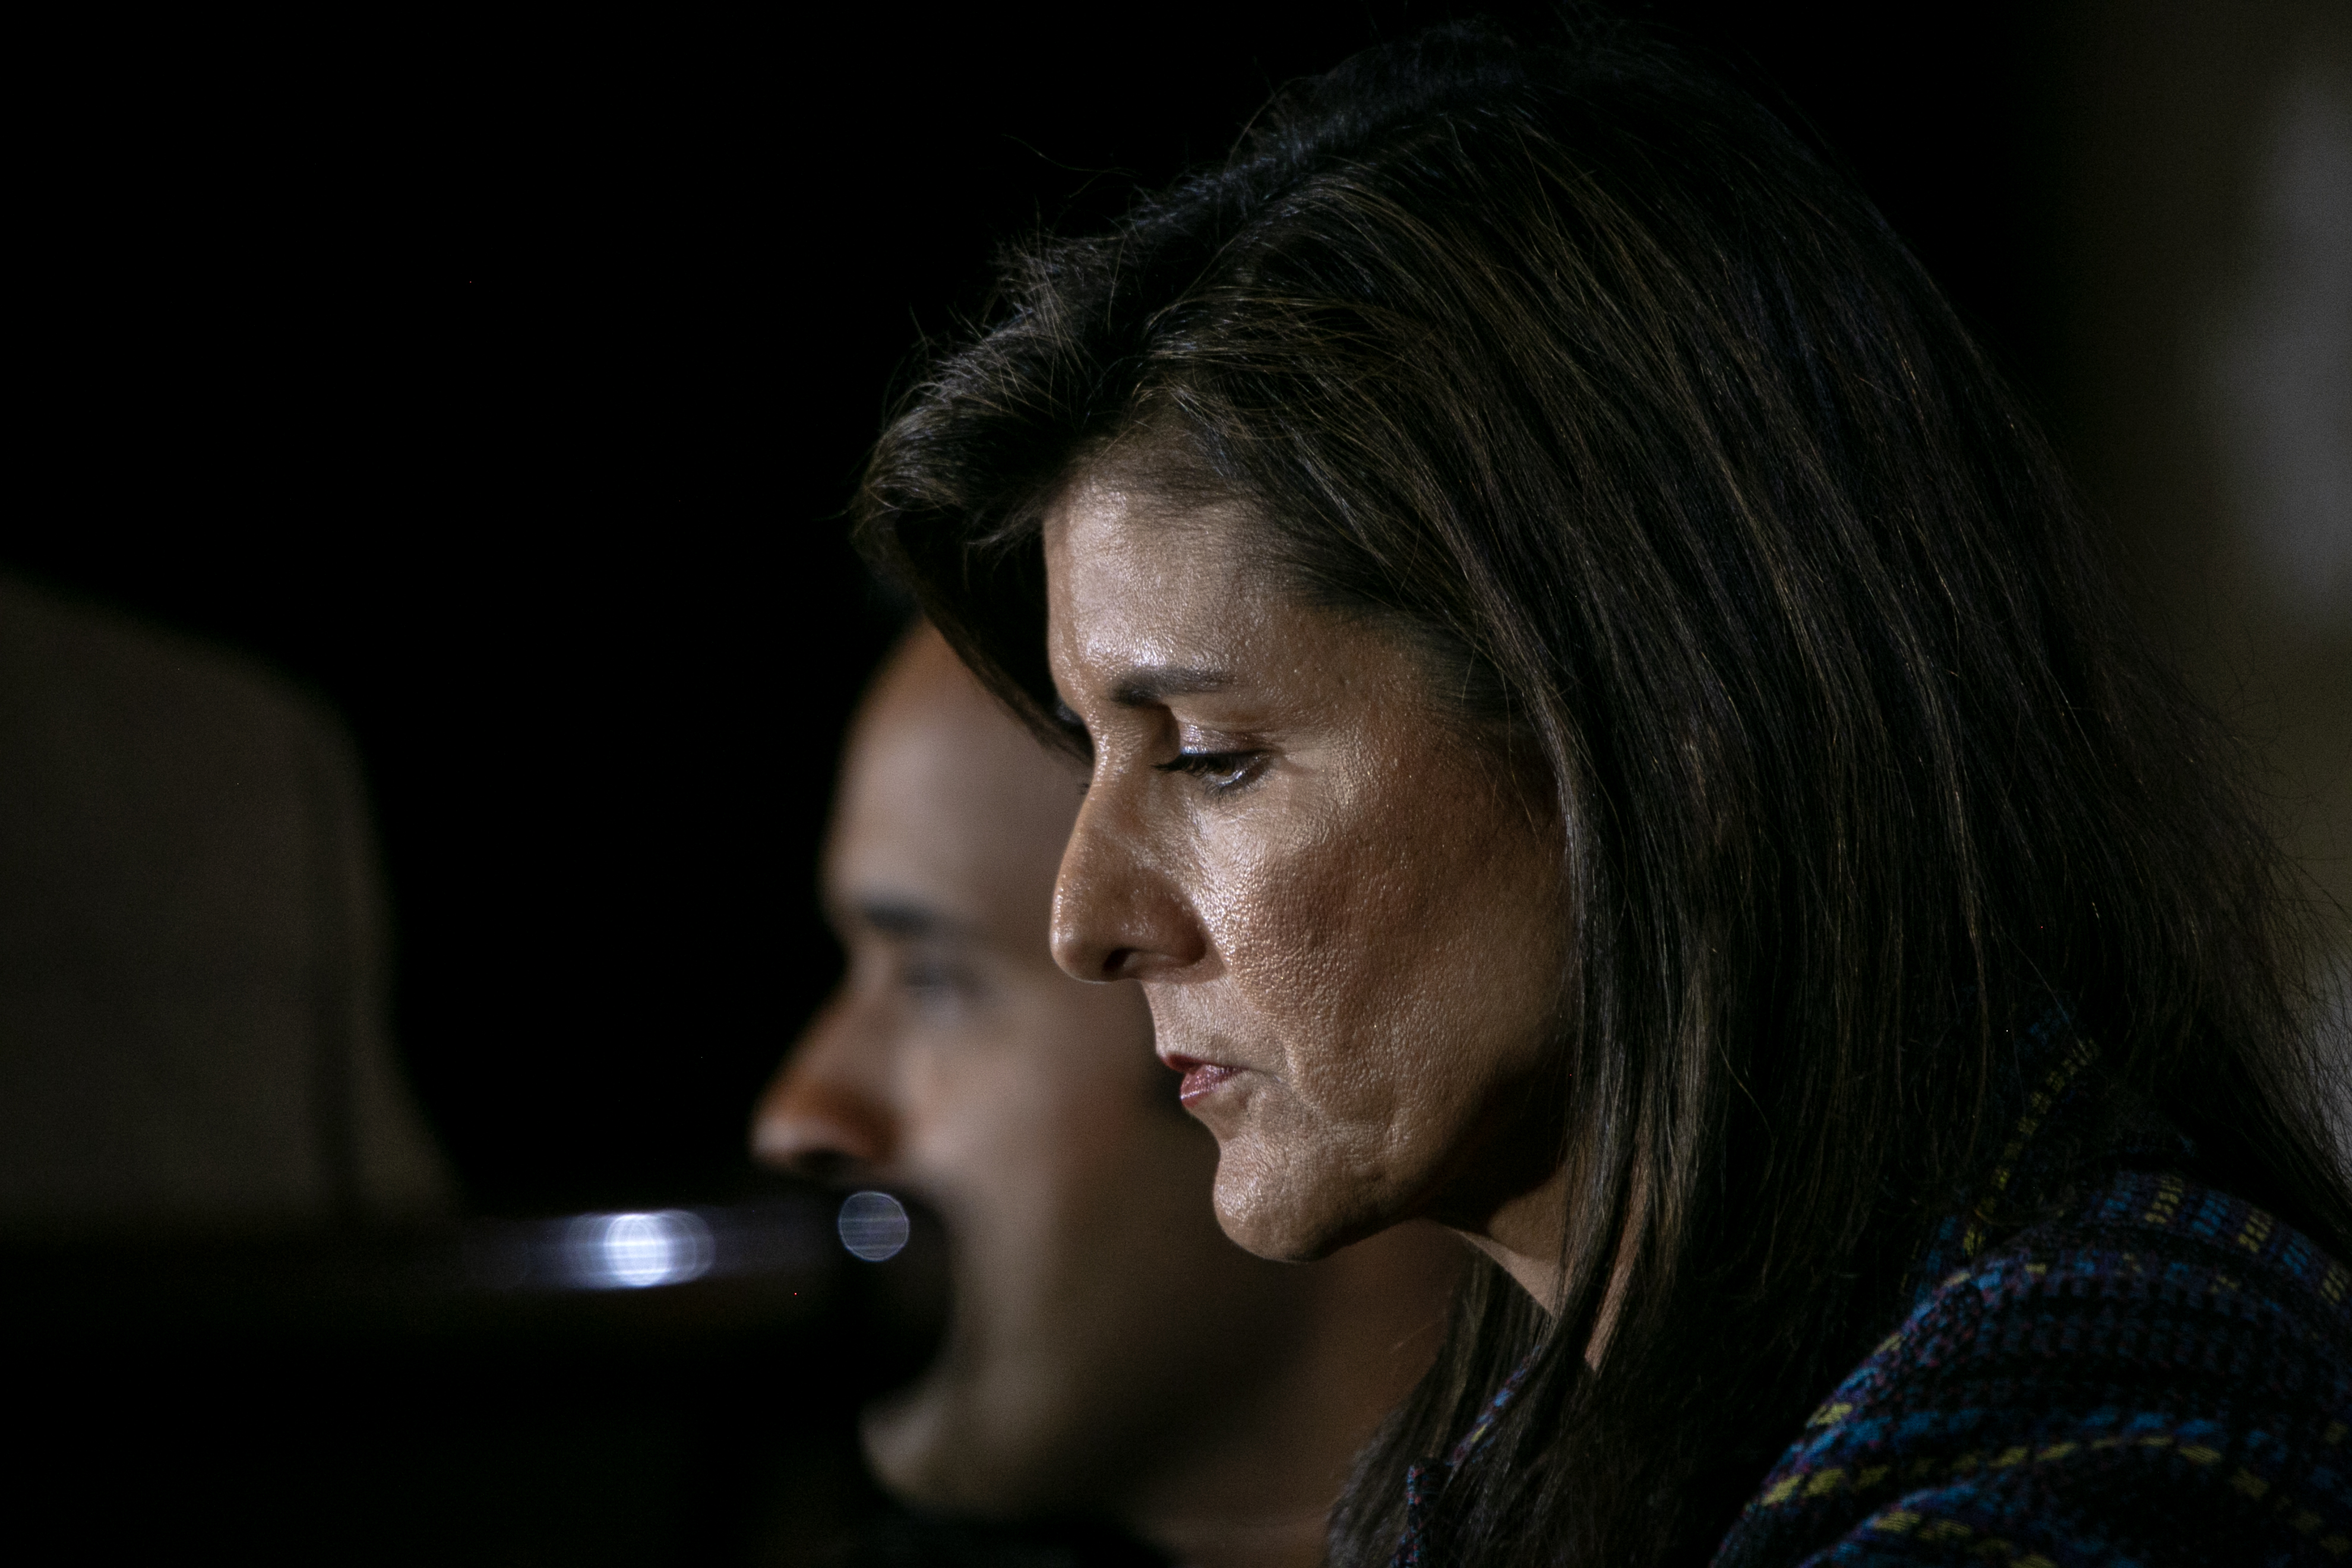 Nikki Haley looks subdued while preparing to speak into a microphone.